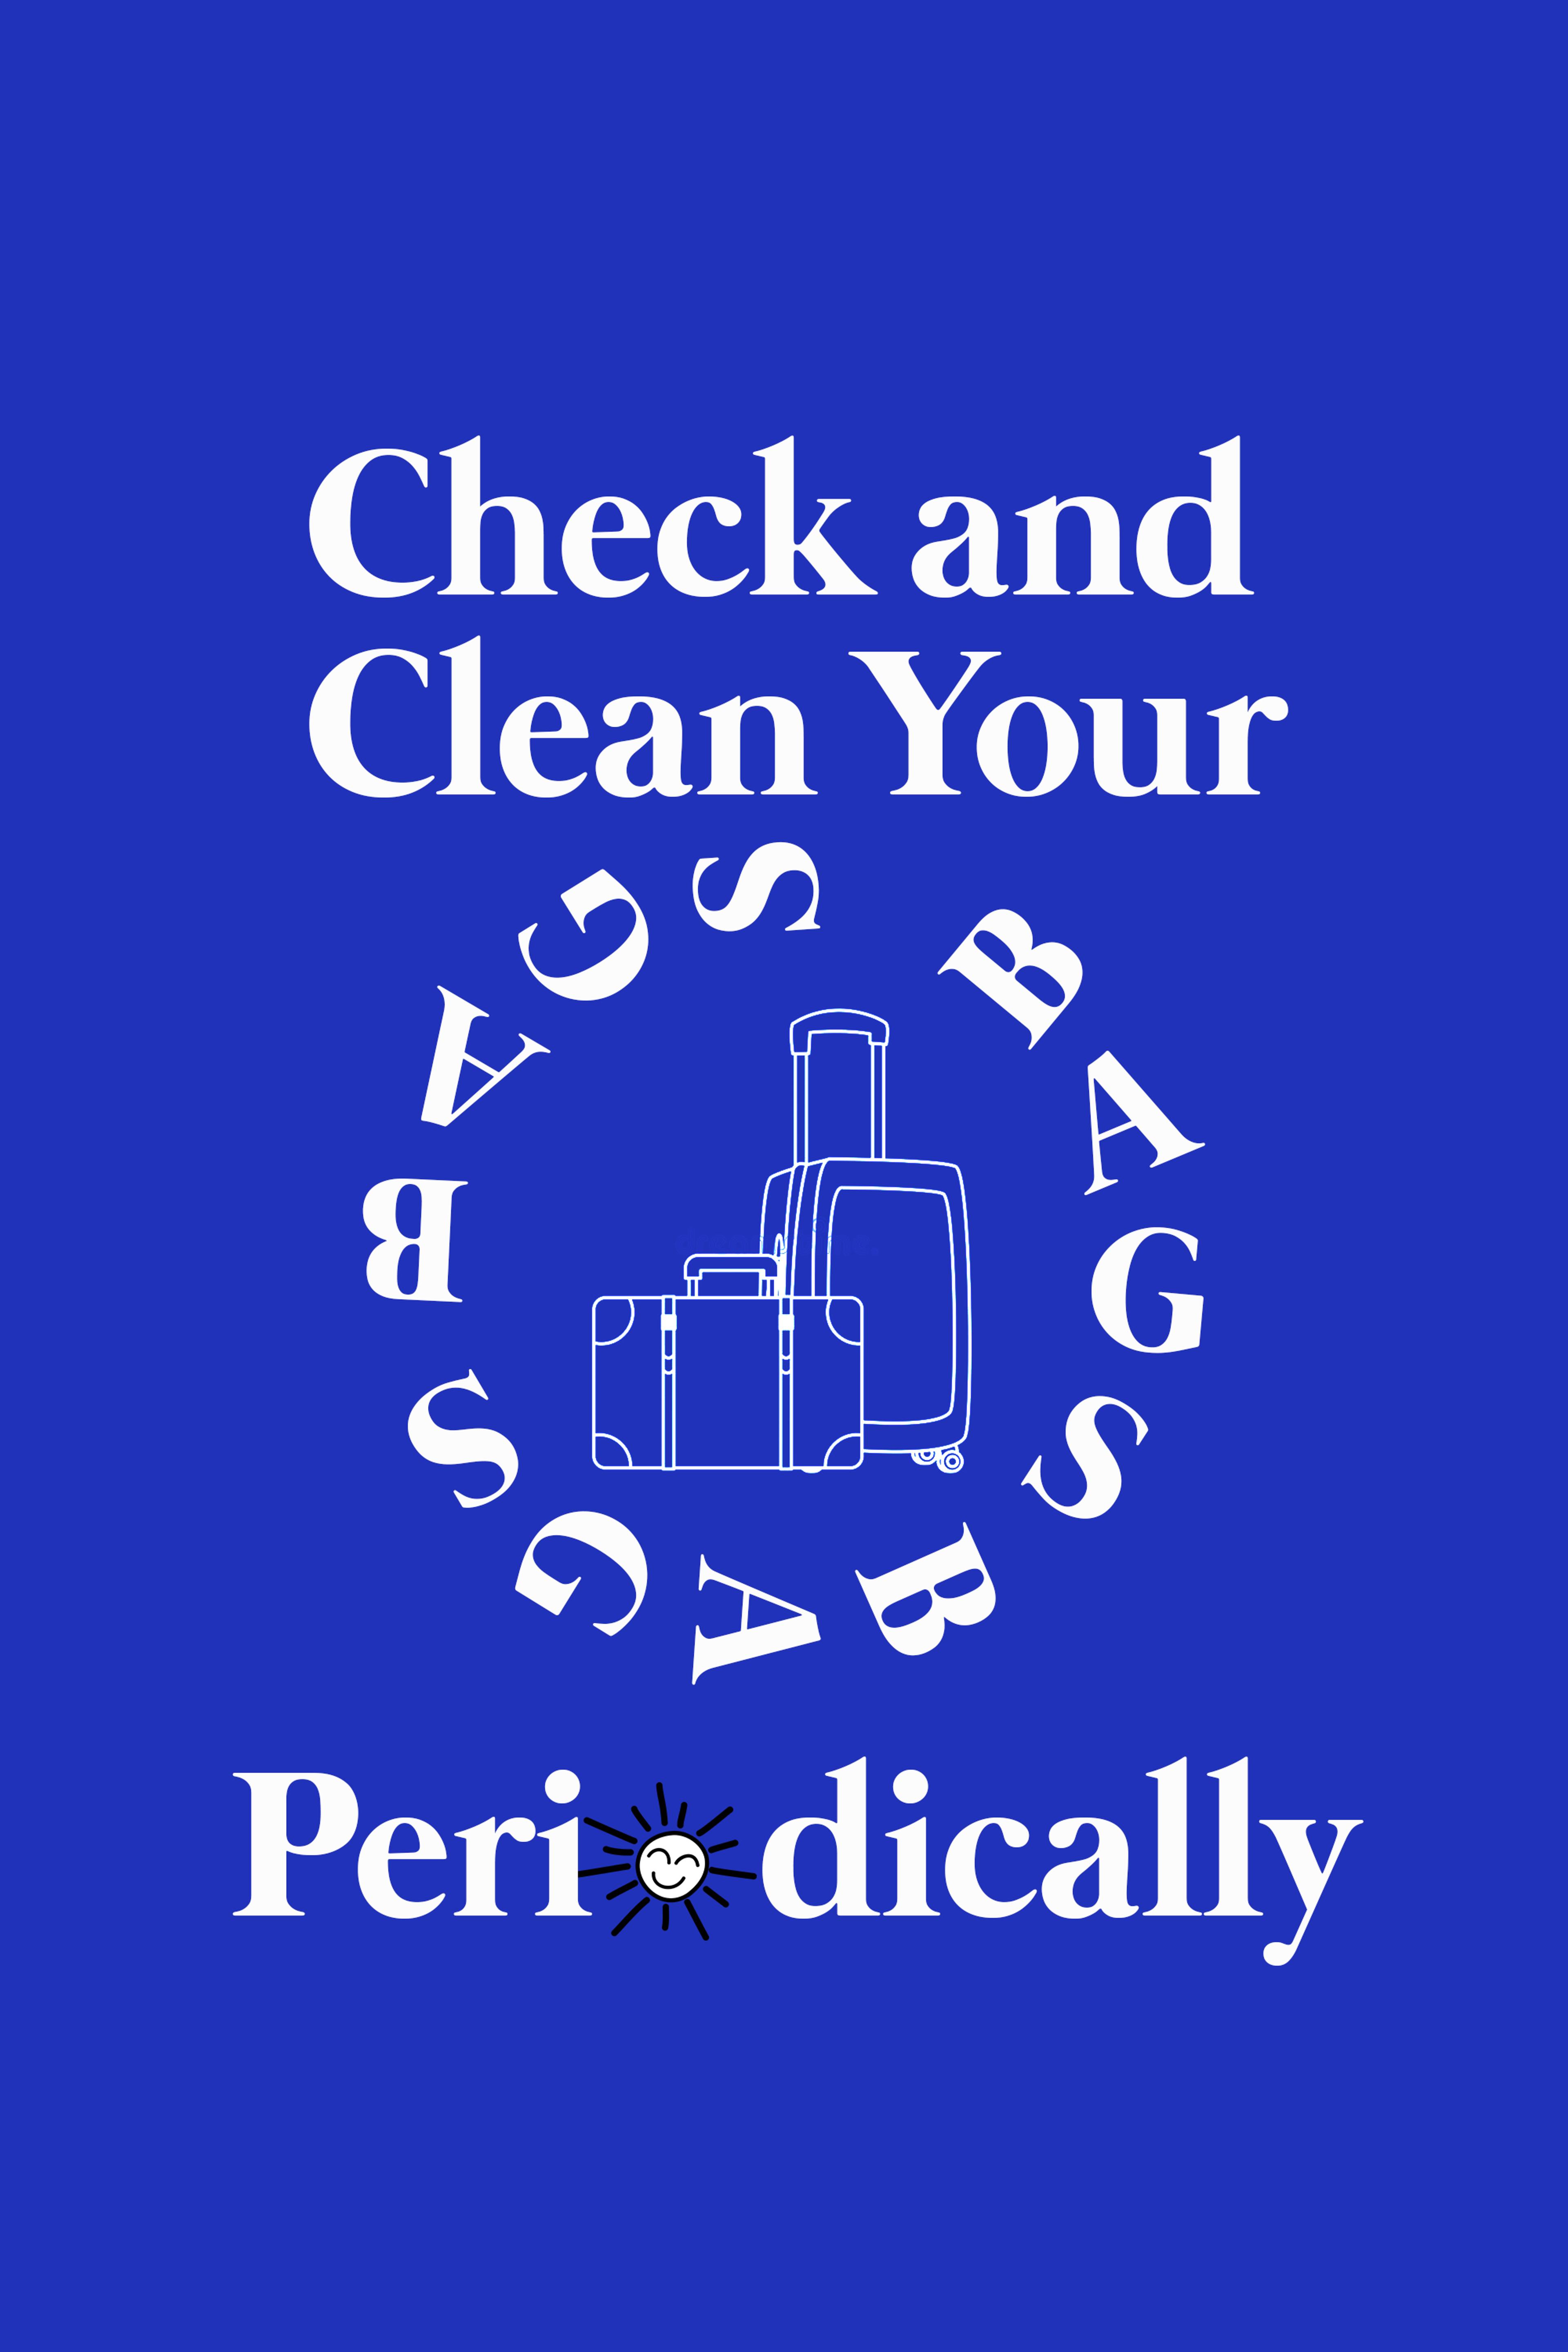 Check and Clean Your Bags Periodically